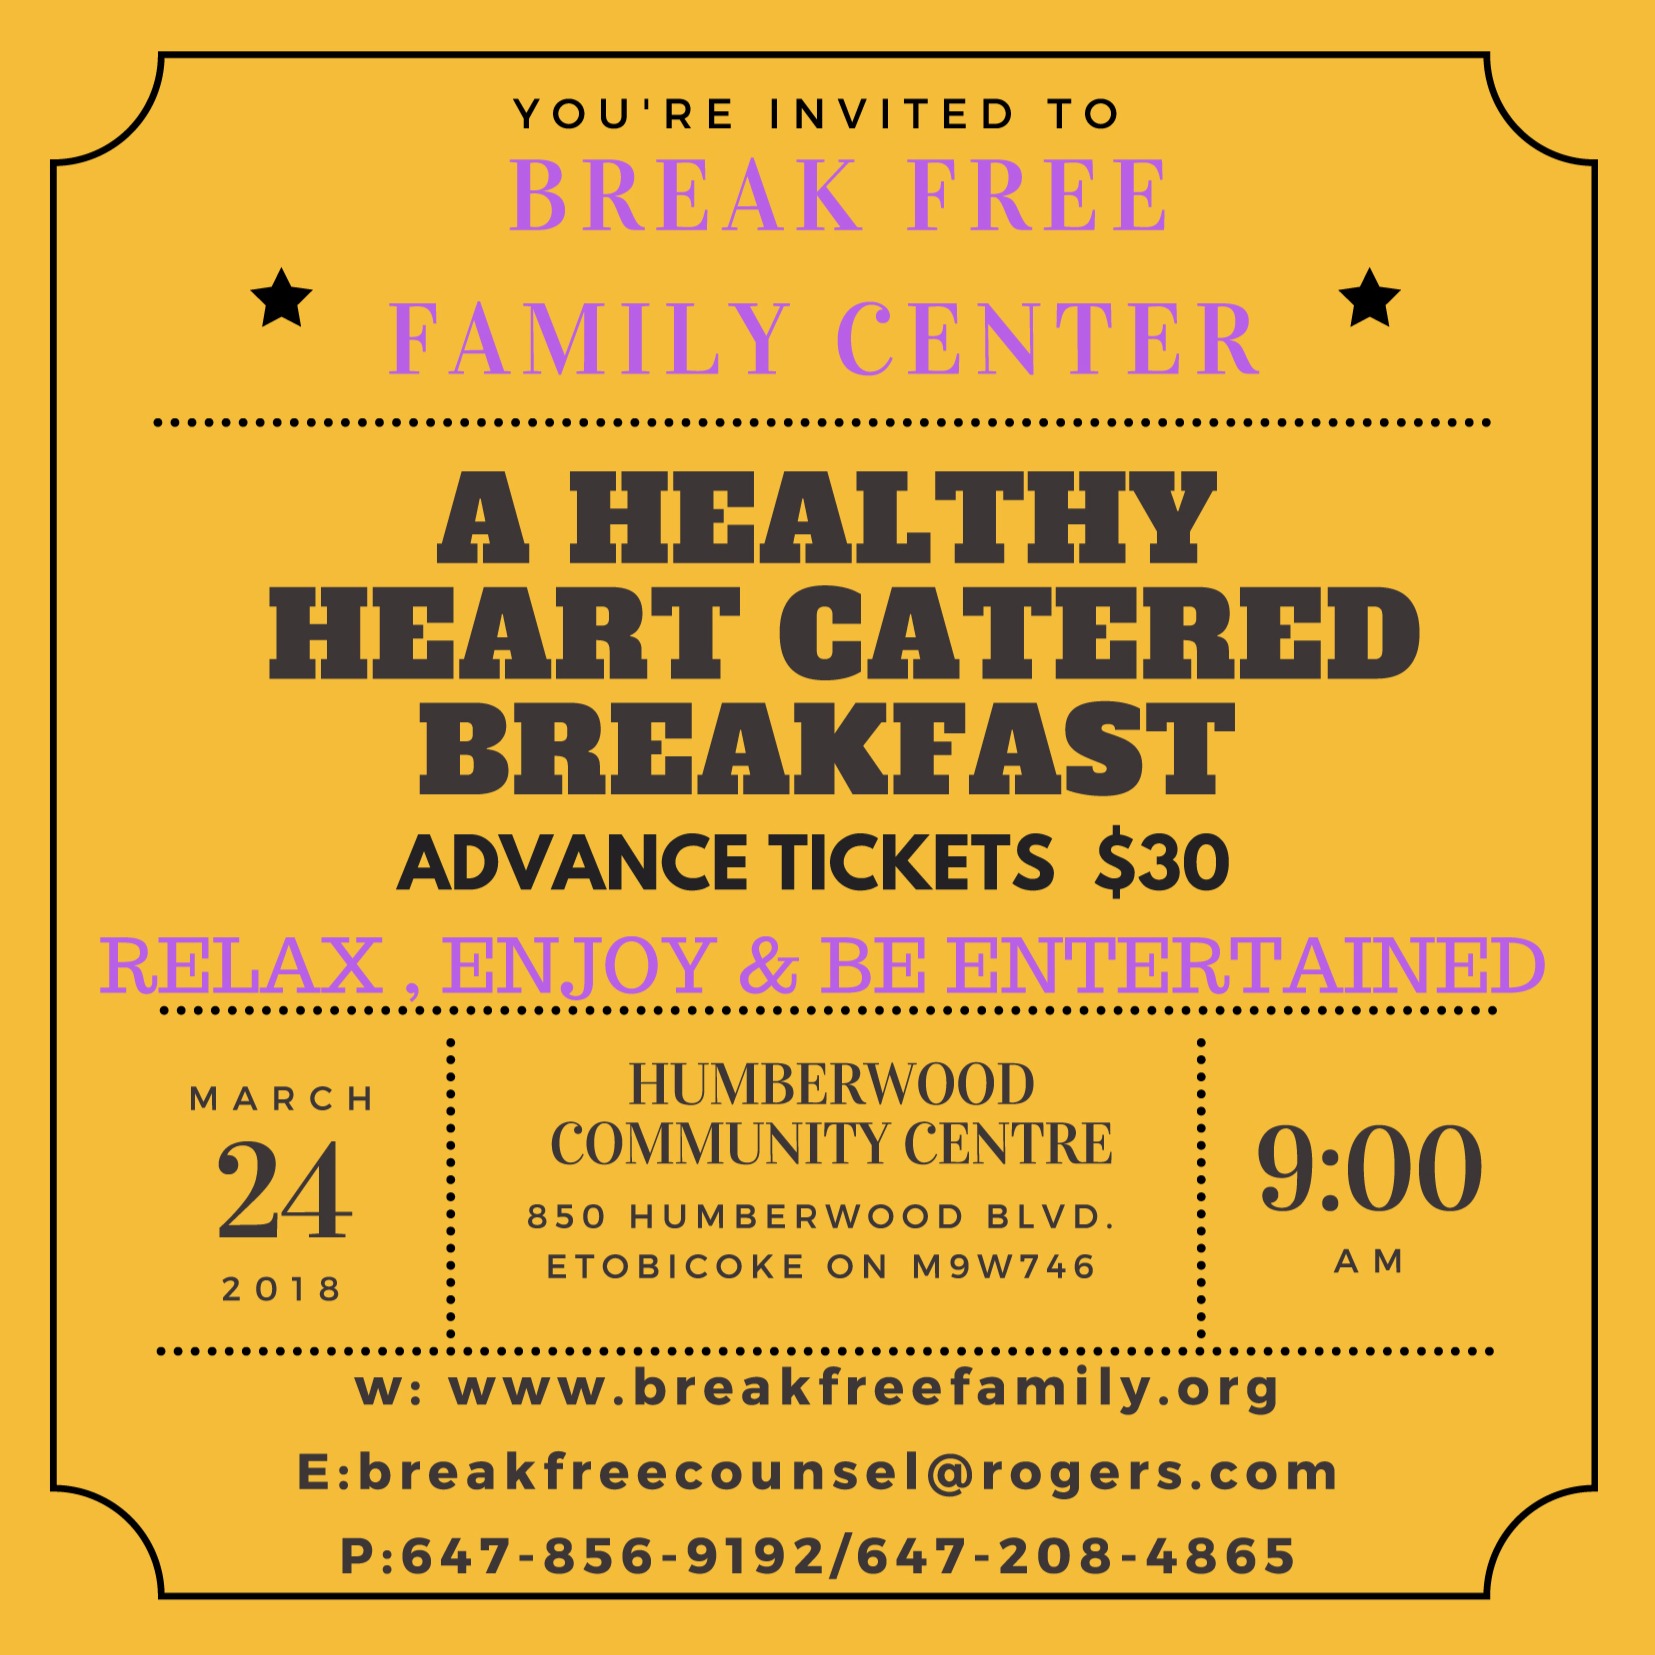 A HEALTHY HEART CATERED BREAKFAST 2018